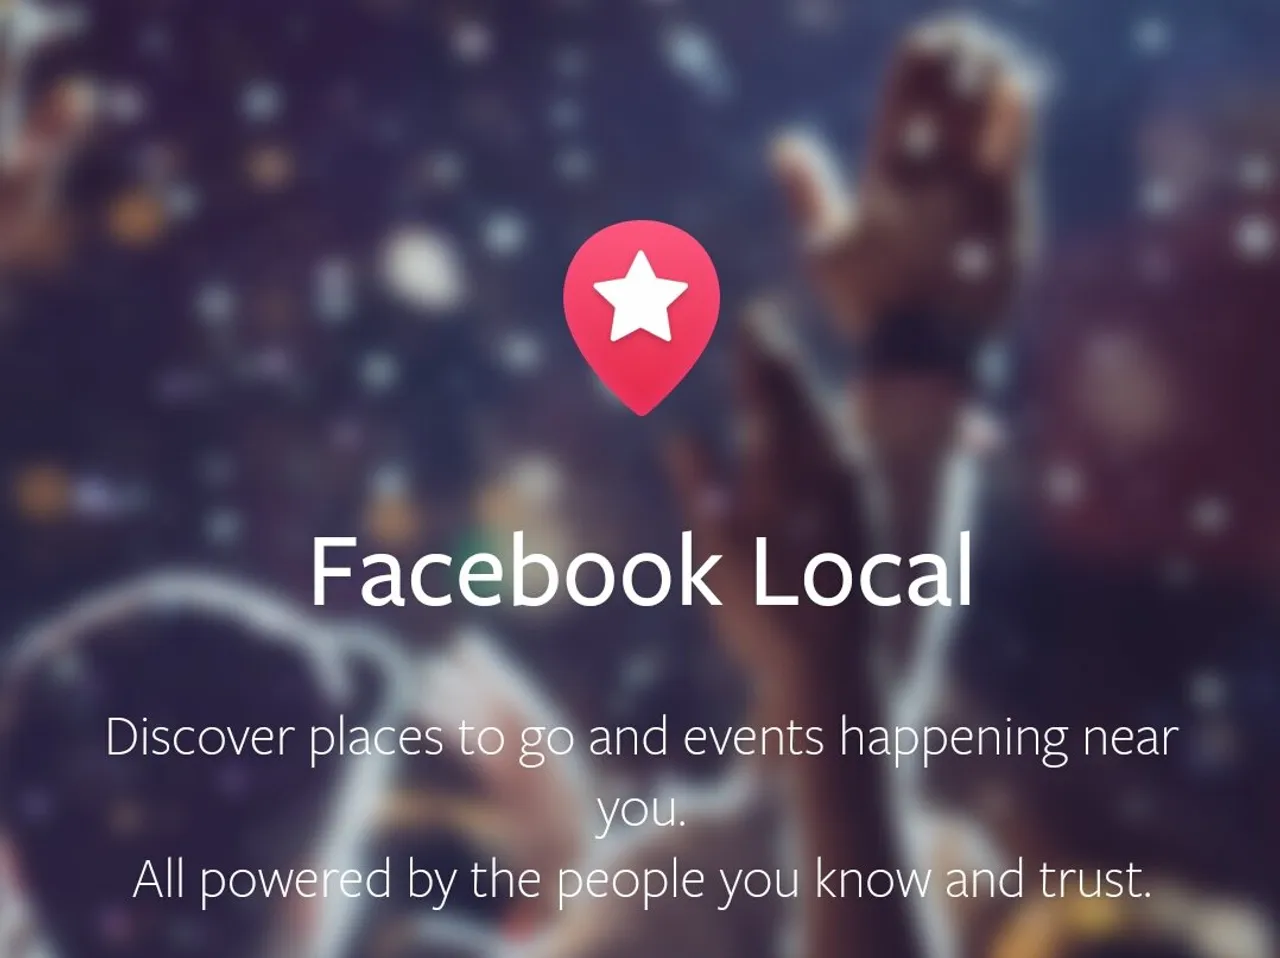 Facebook relaunches its standalone Events app as 'Facebook Local'